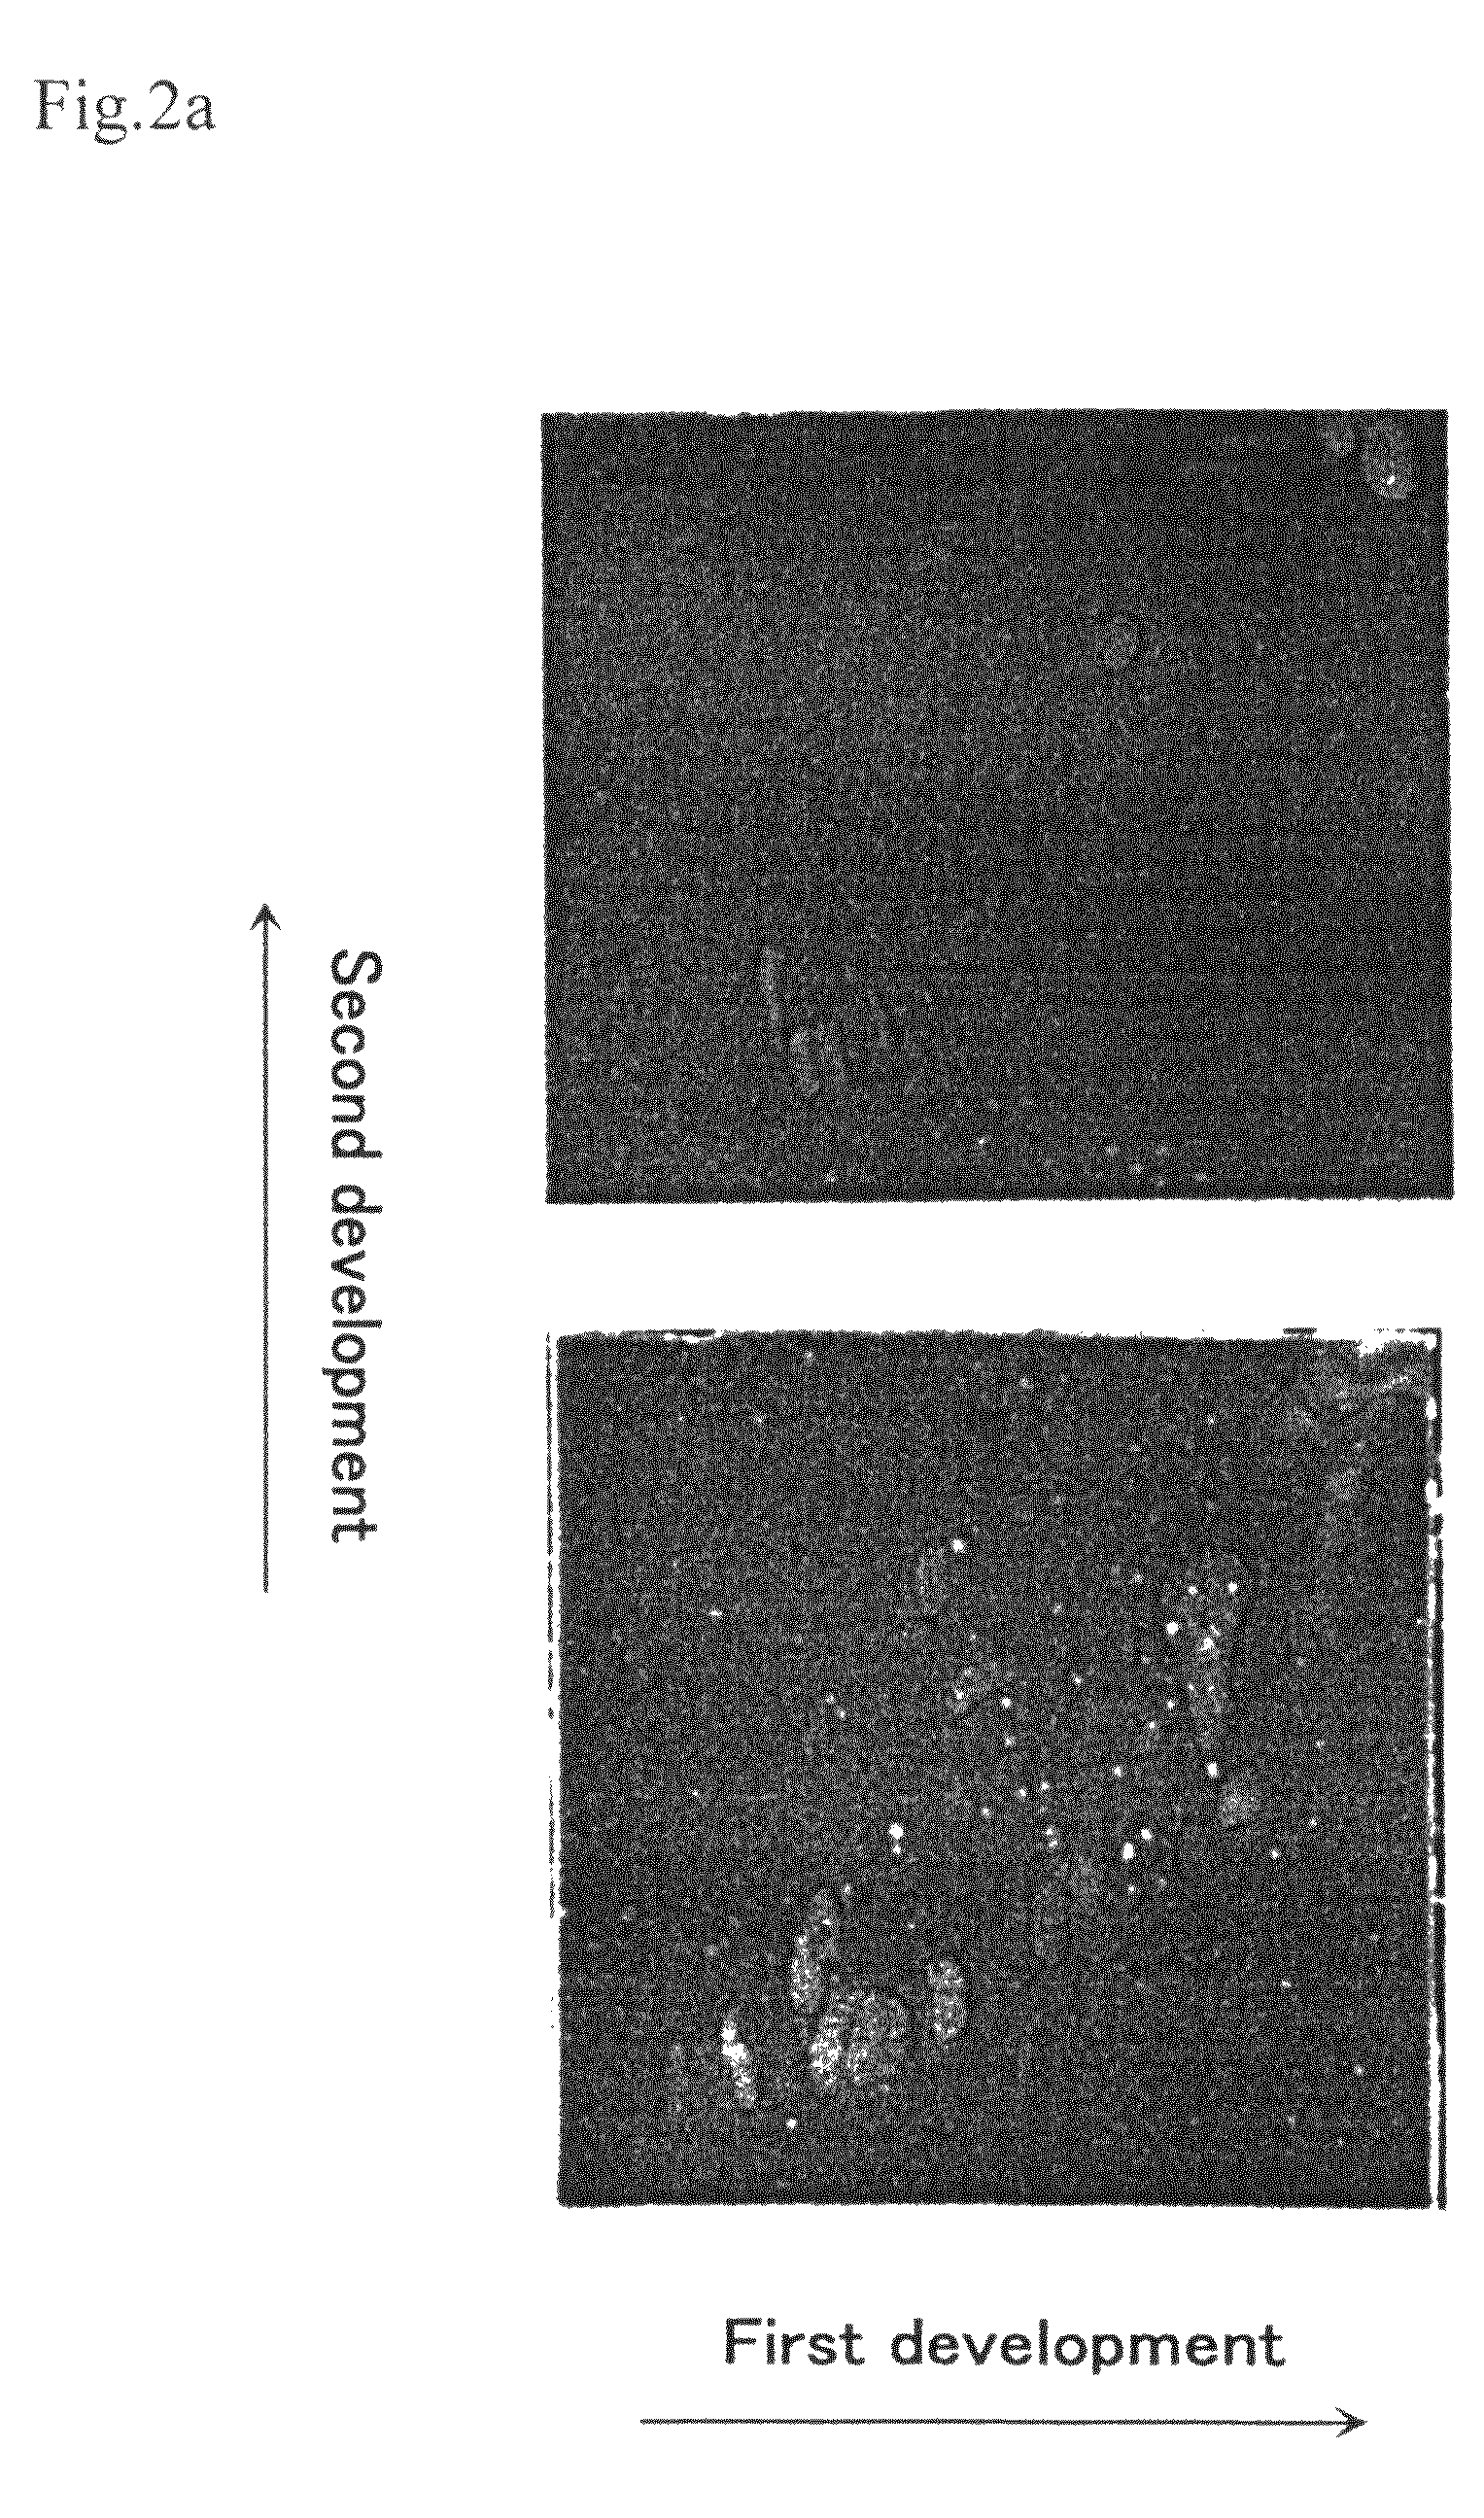 Method for production of DHA-containing phospholipid through microbial fermentation